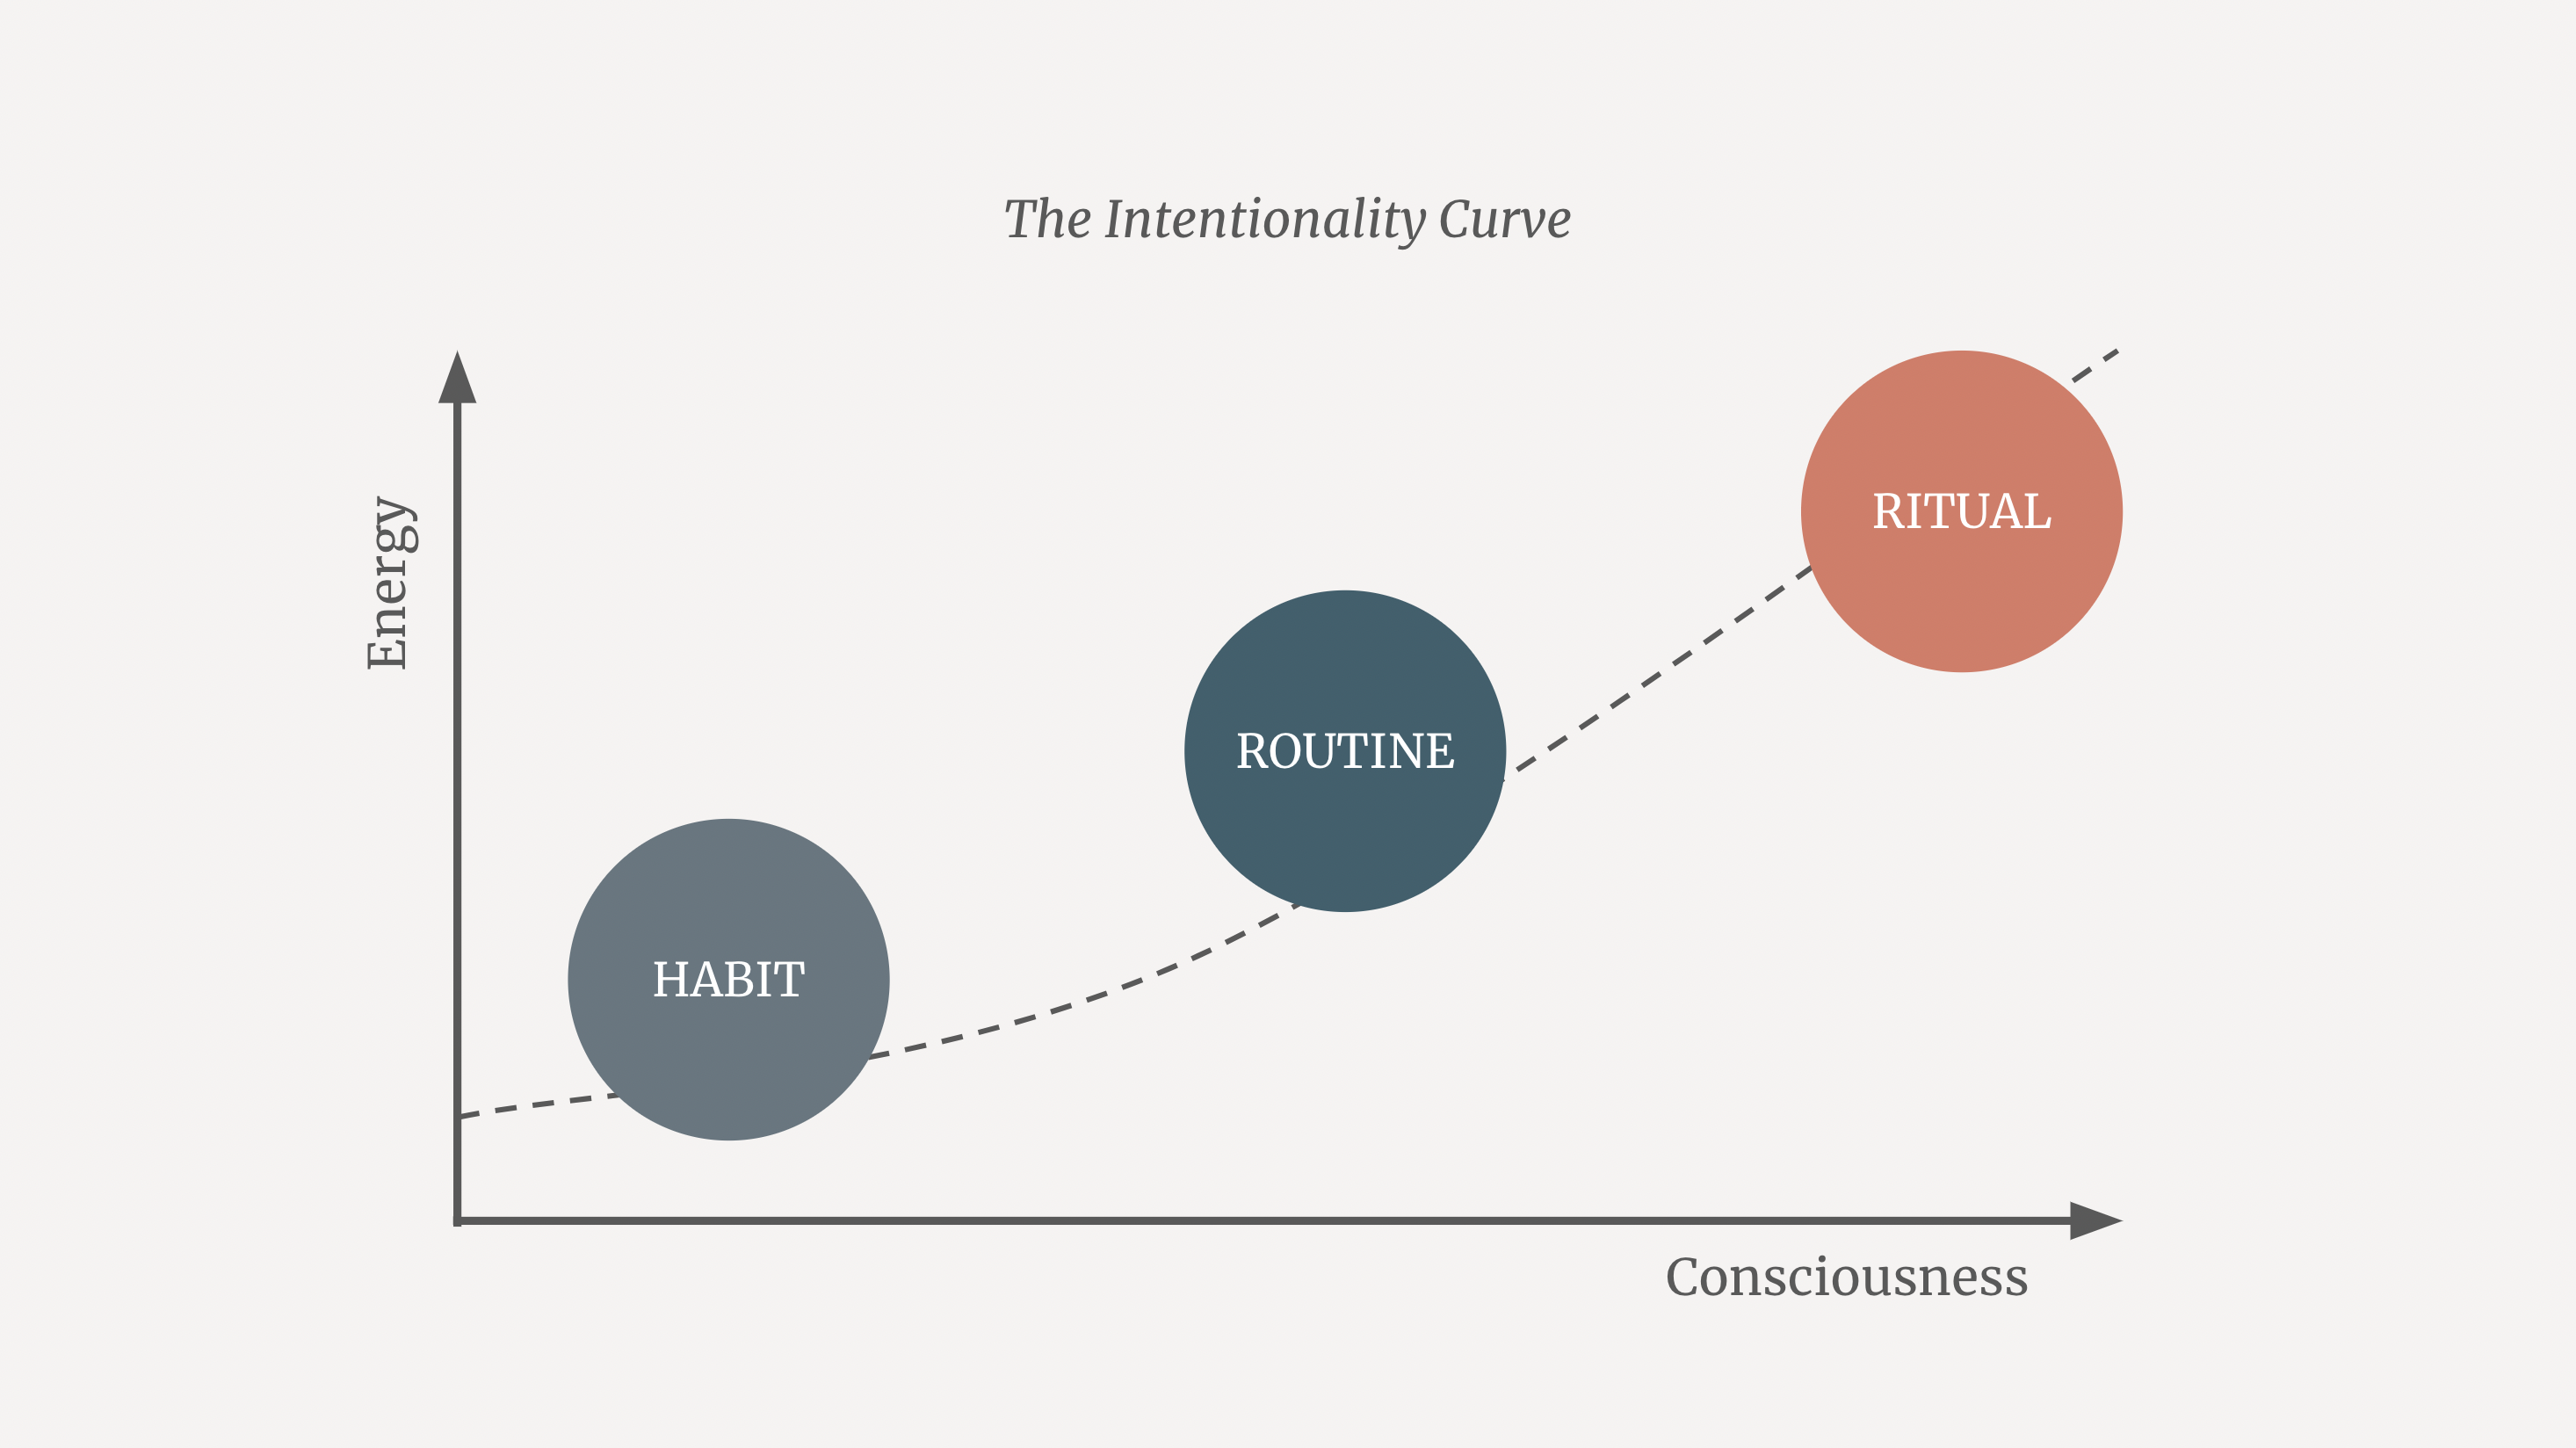 The Intentionality Curve: Living more Intentionally with Habits, Routines, and Rituals